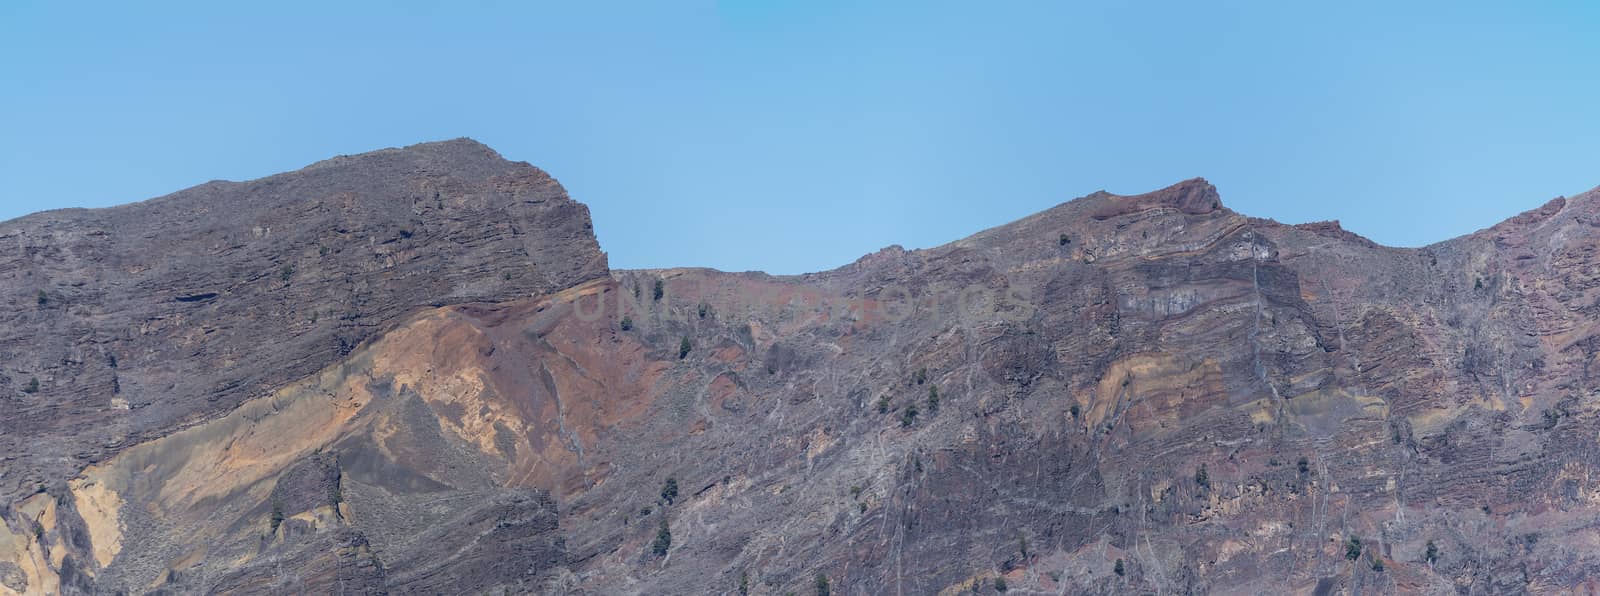 Panoramic view on colorful vocanic rock of crater Caldera de Taburiente with mountainRoque de los Muchachos on the island La Palma, Canary Islands, Spain. Blue sky background.